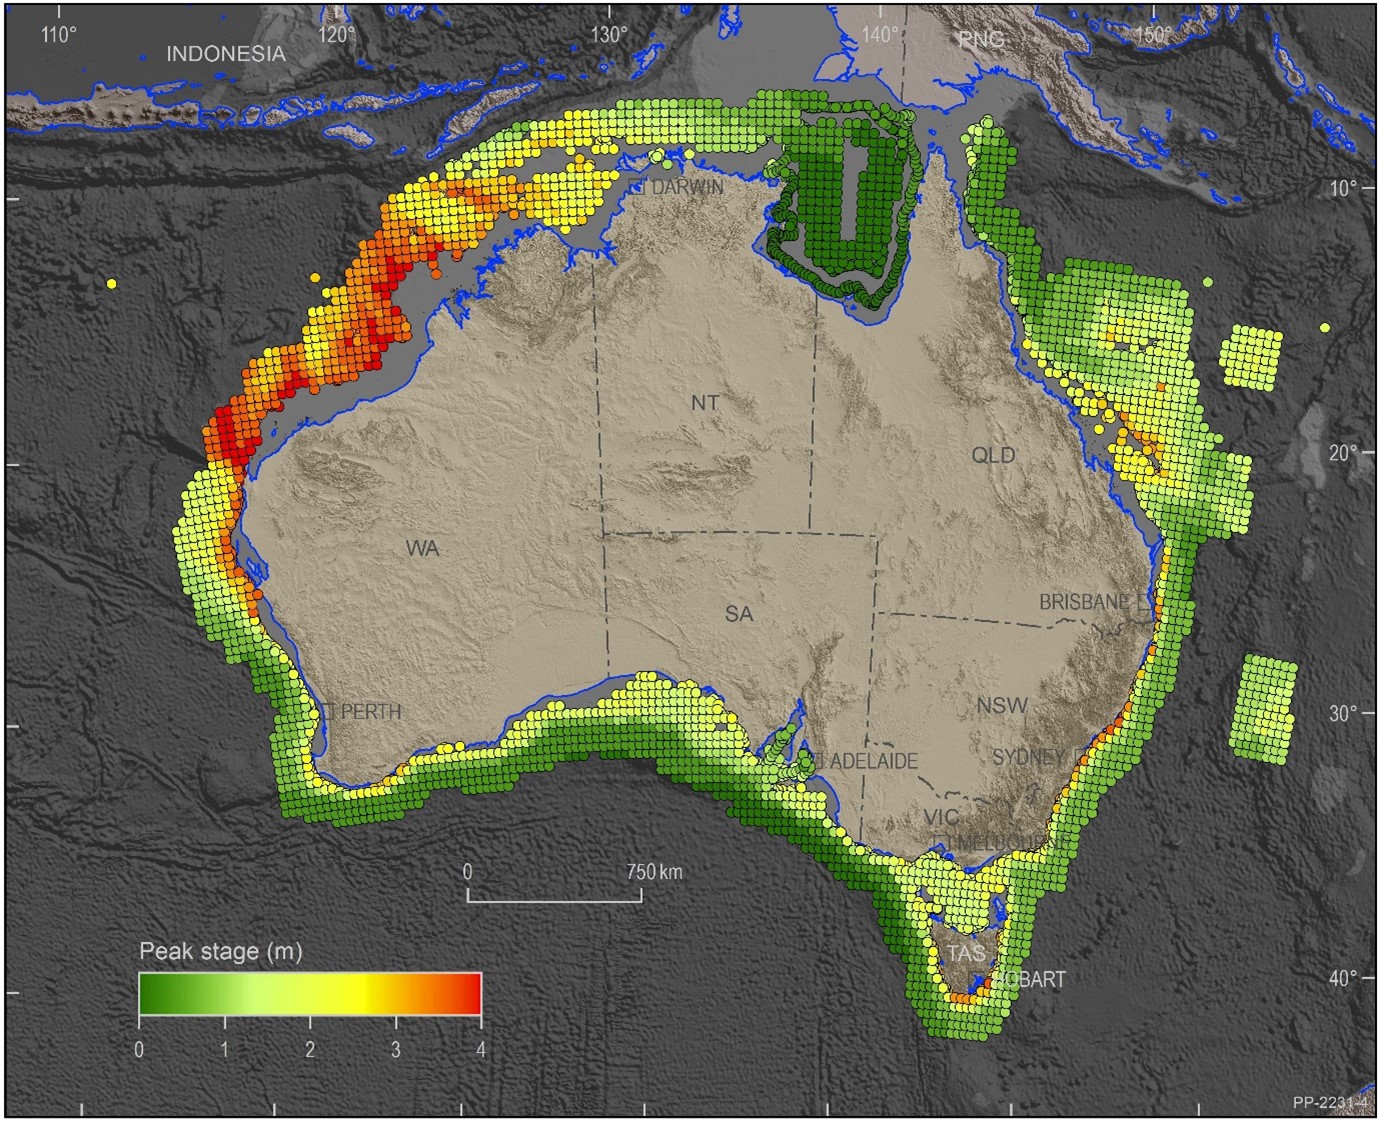 Map of Australia showing modelled one-in-1000-year tsunami wave height in the waters offshore.